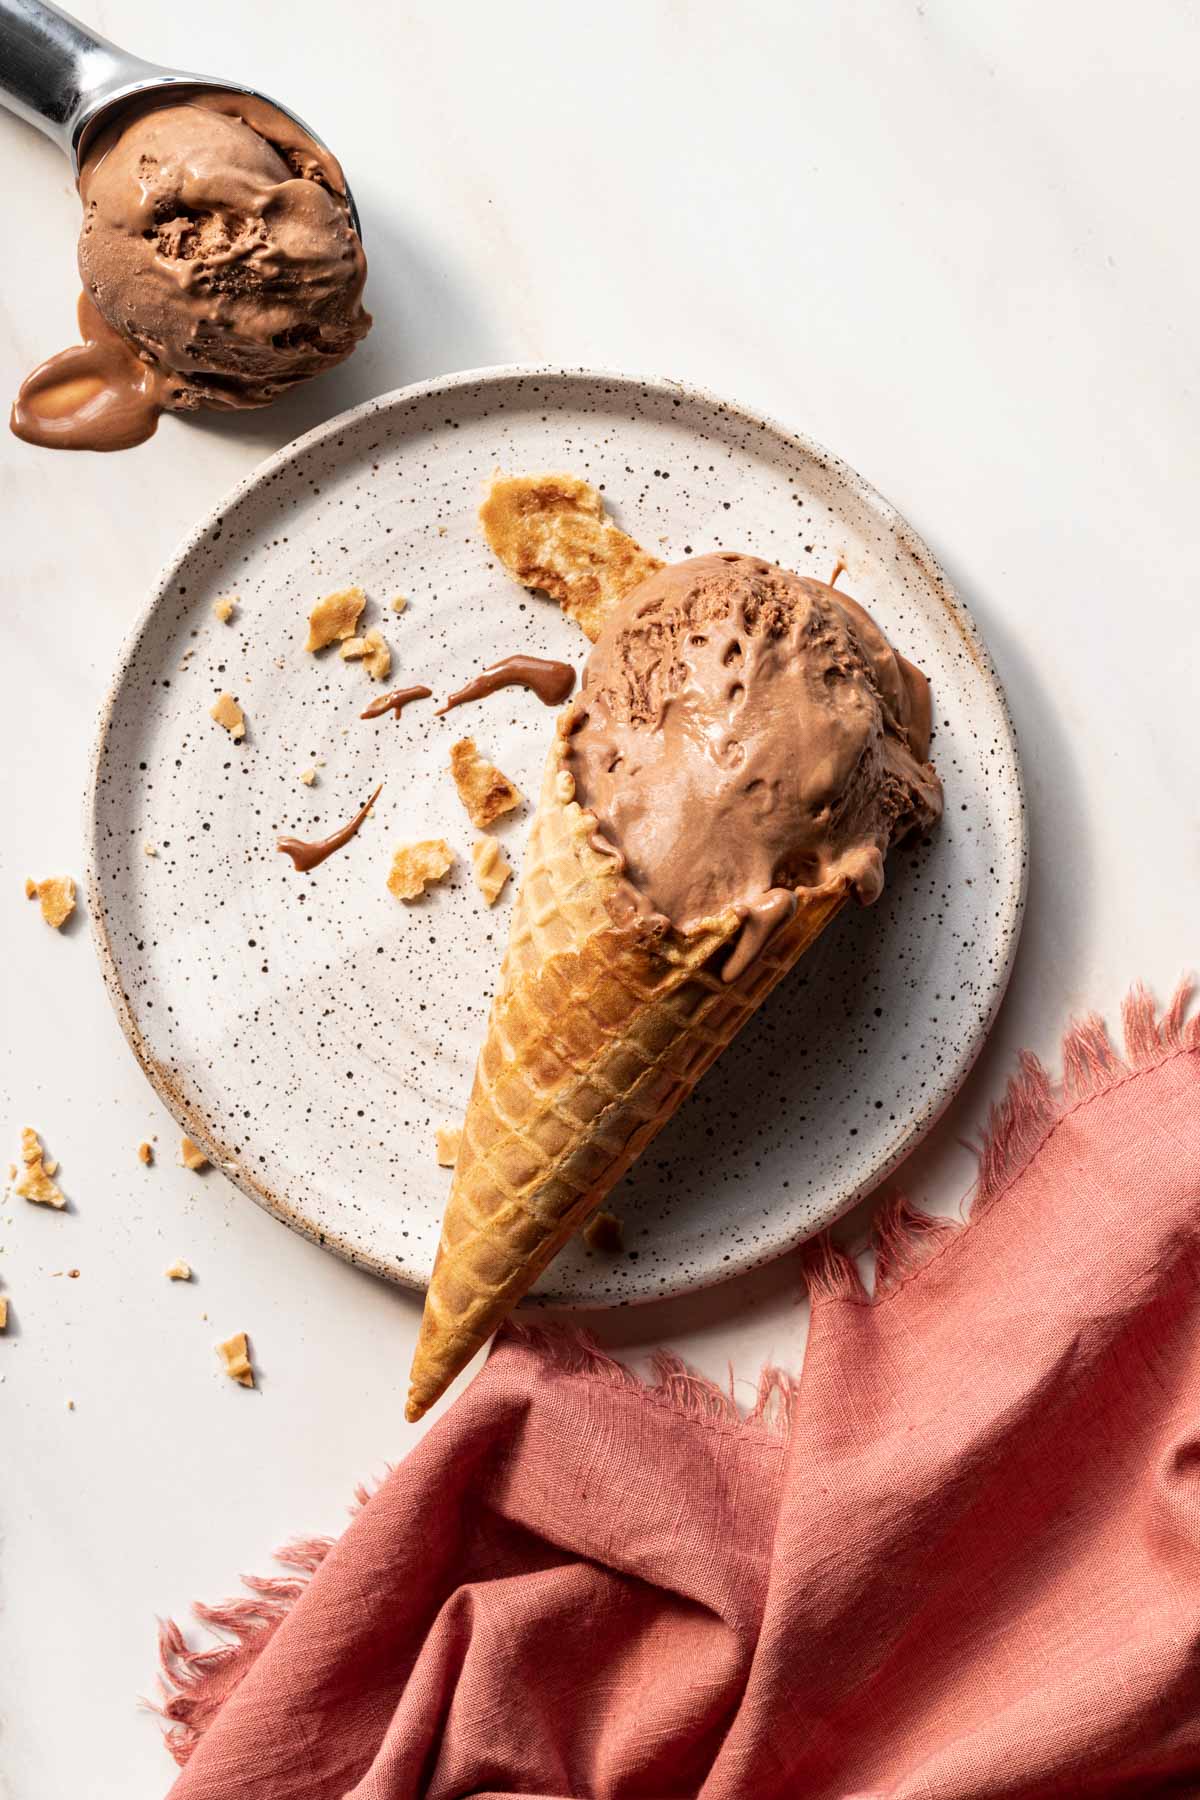 No churn chocolate ice cream in a waffle cone on a plate